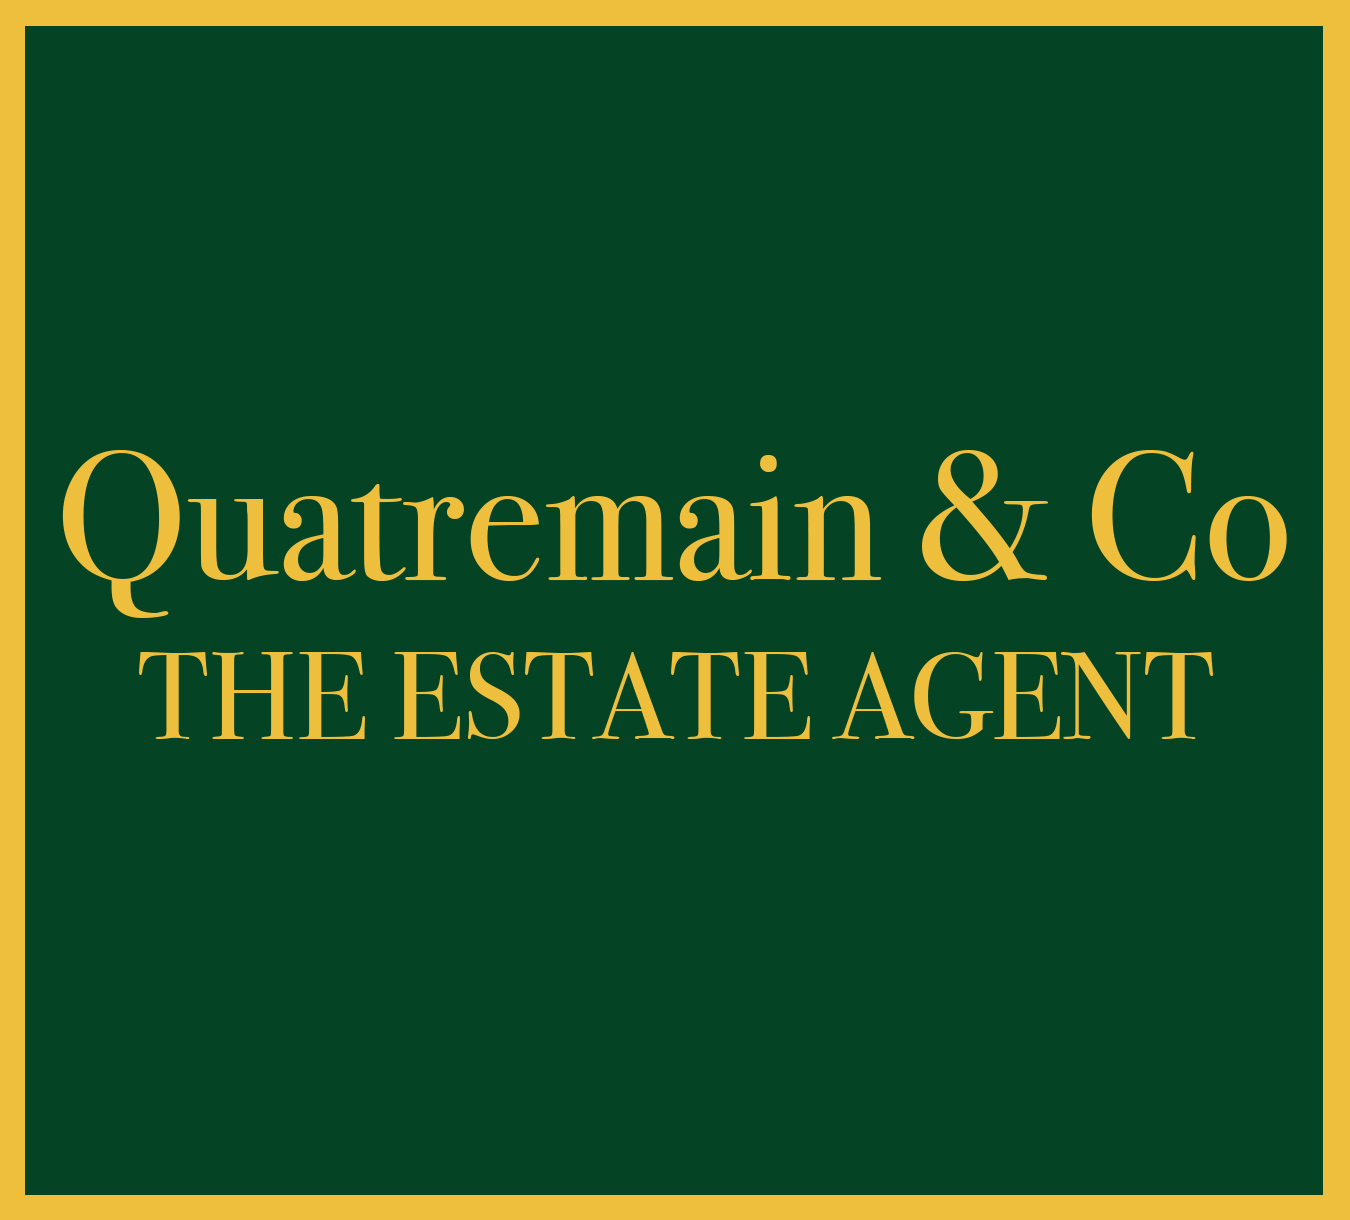 Please contact Quatremain & Co on 0208 016 5657.